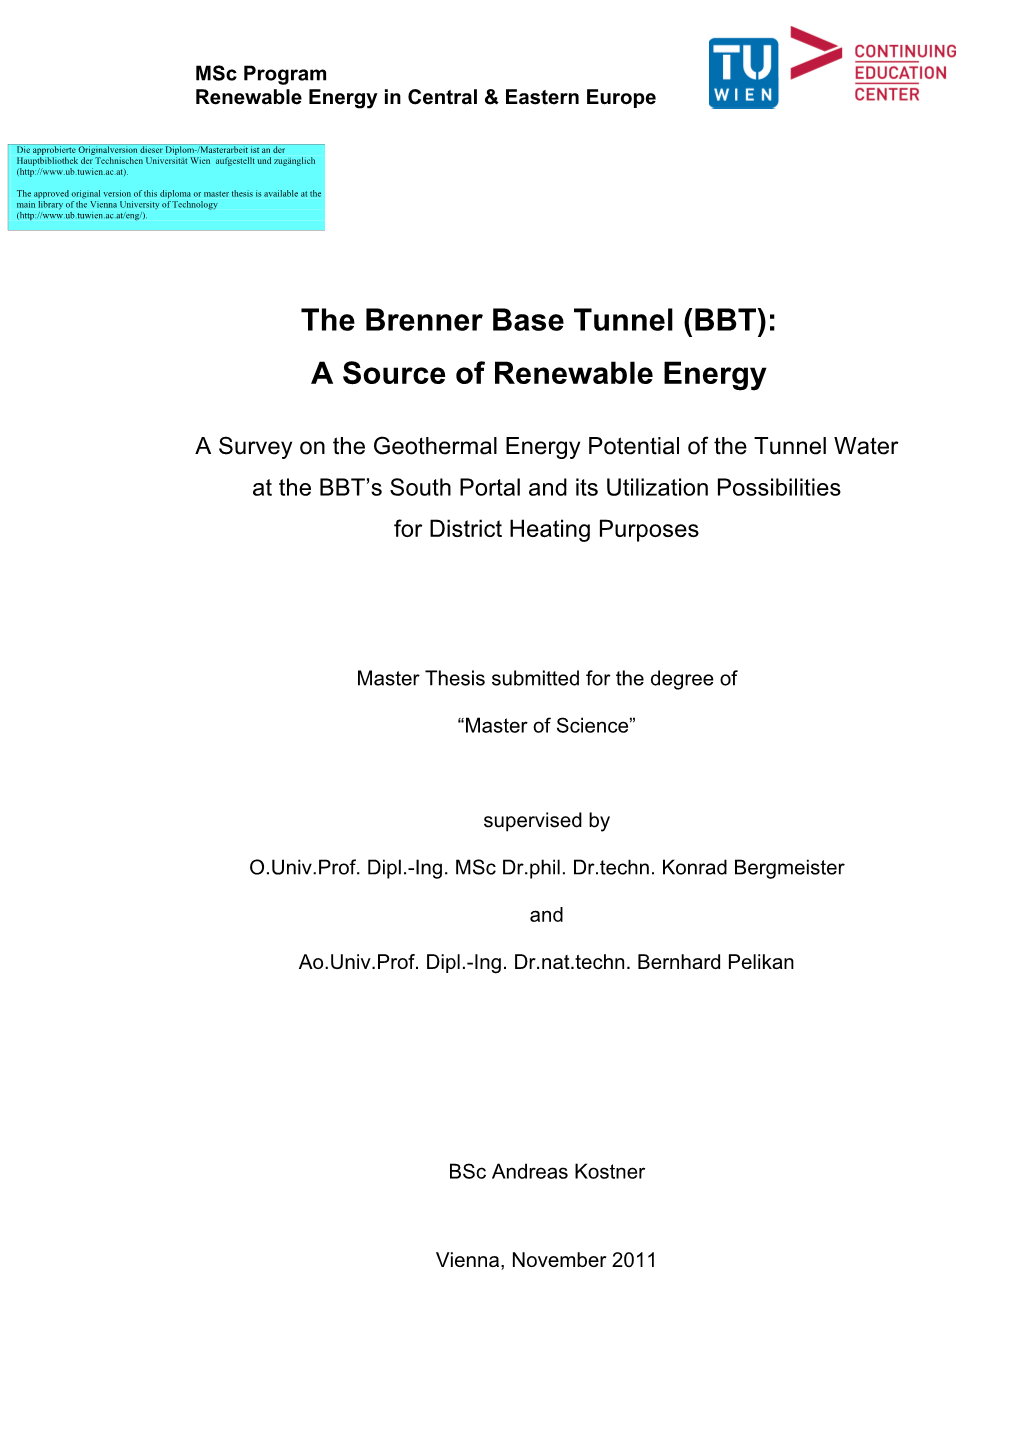 The Brenner Base Tunnel (BBT): a Source of Renewable Energy